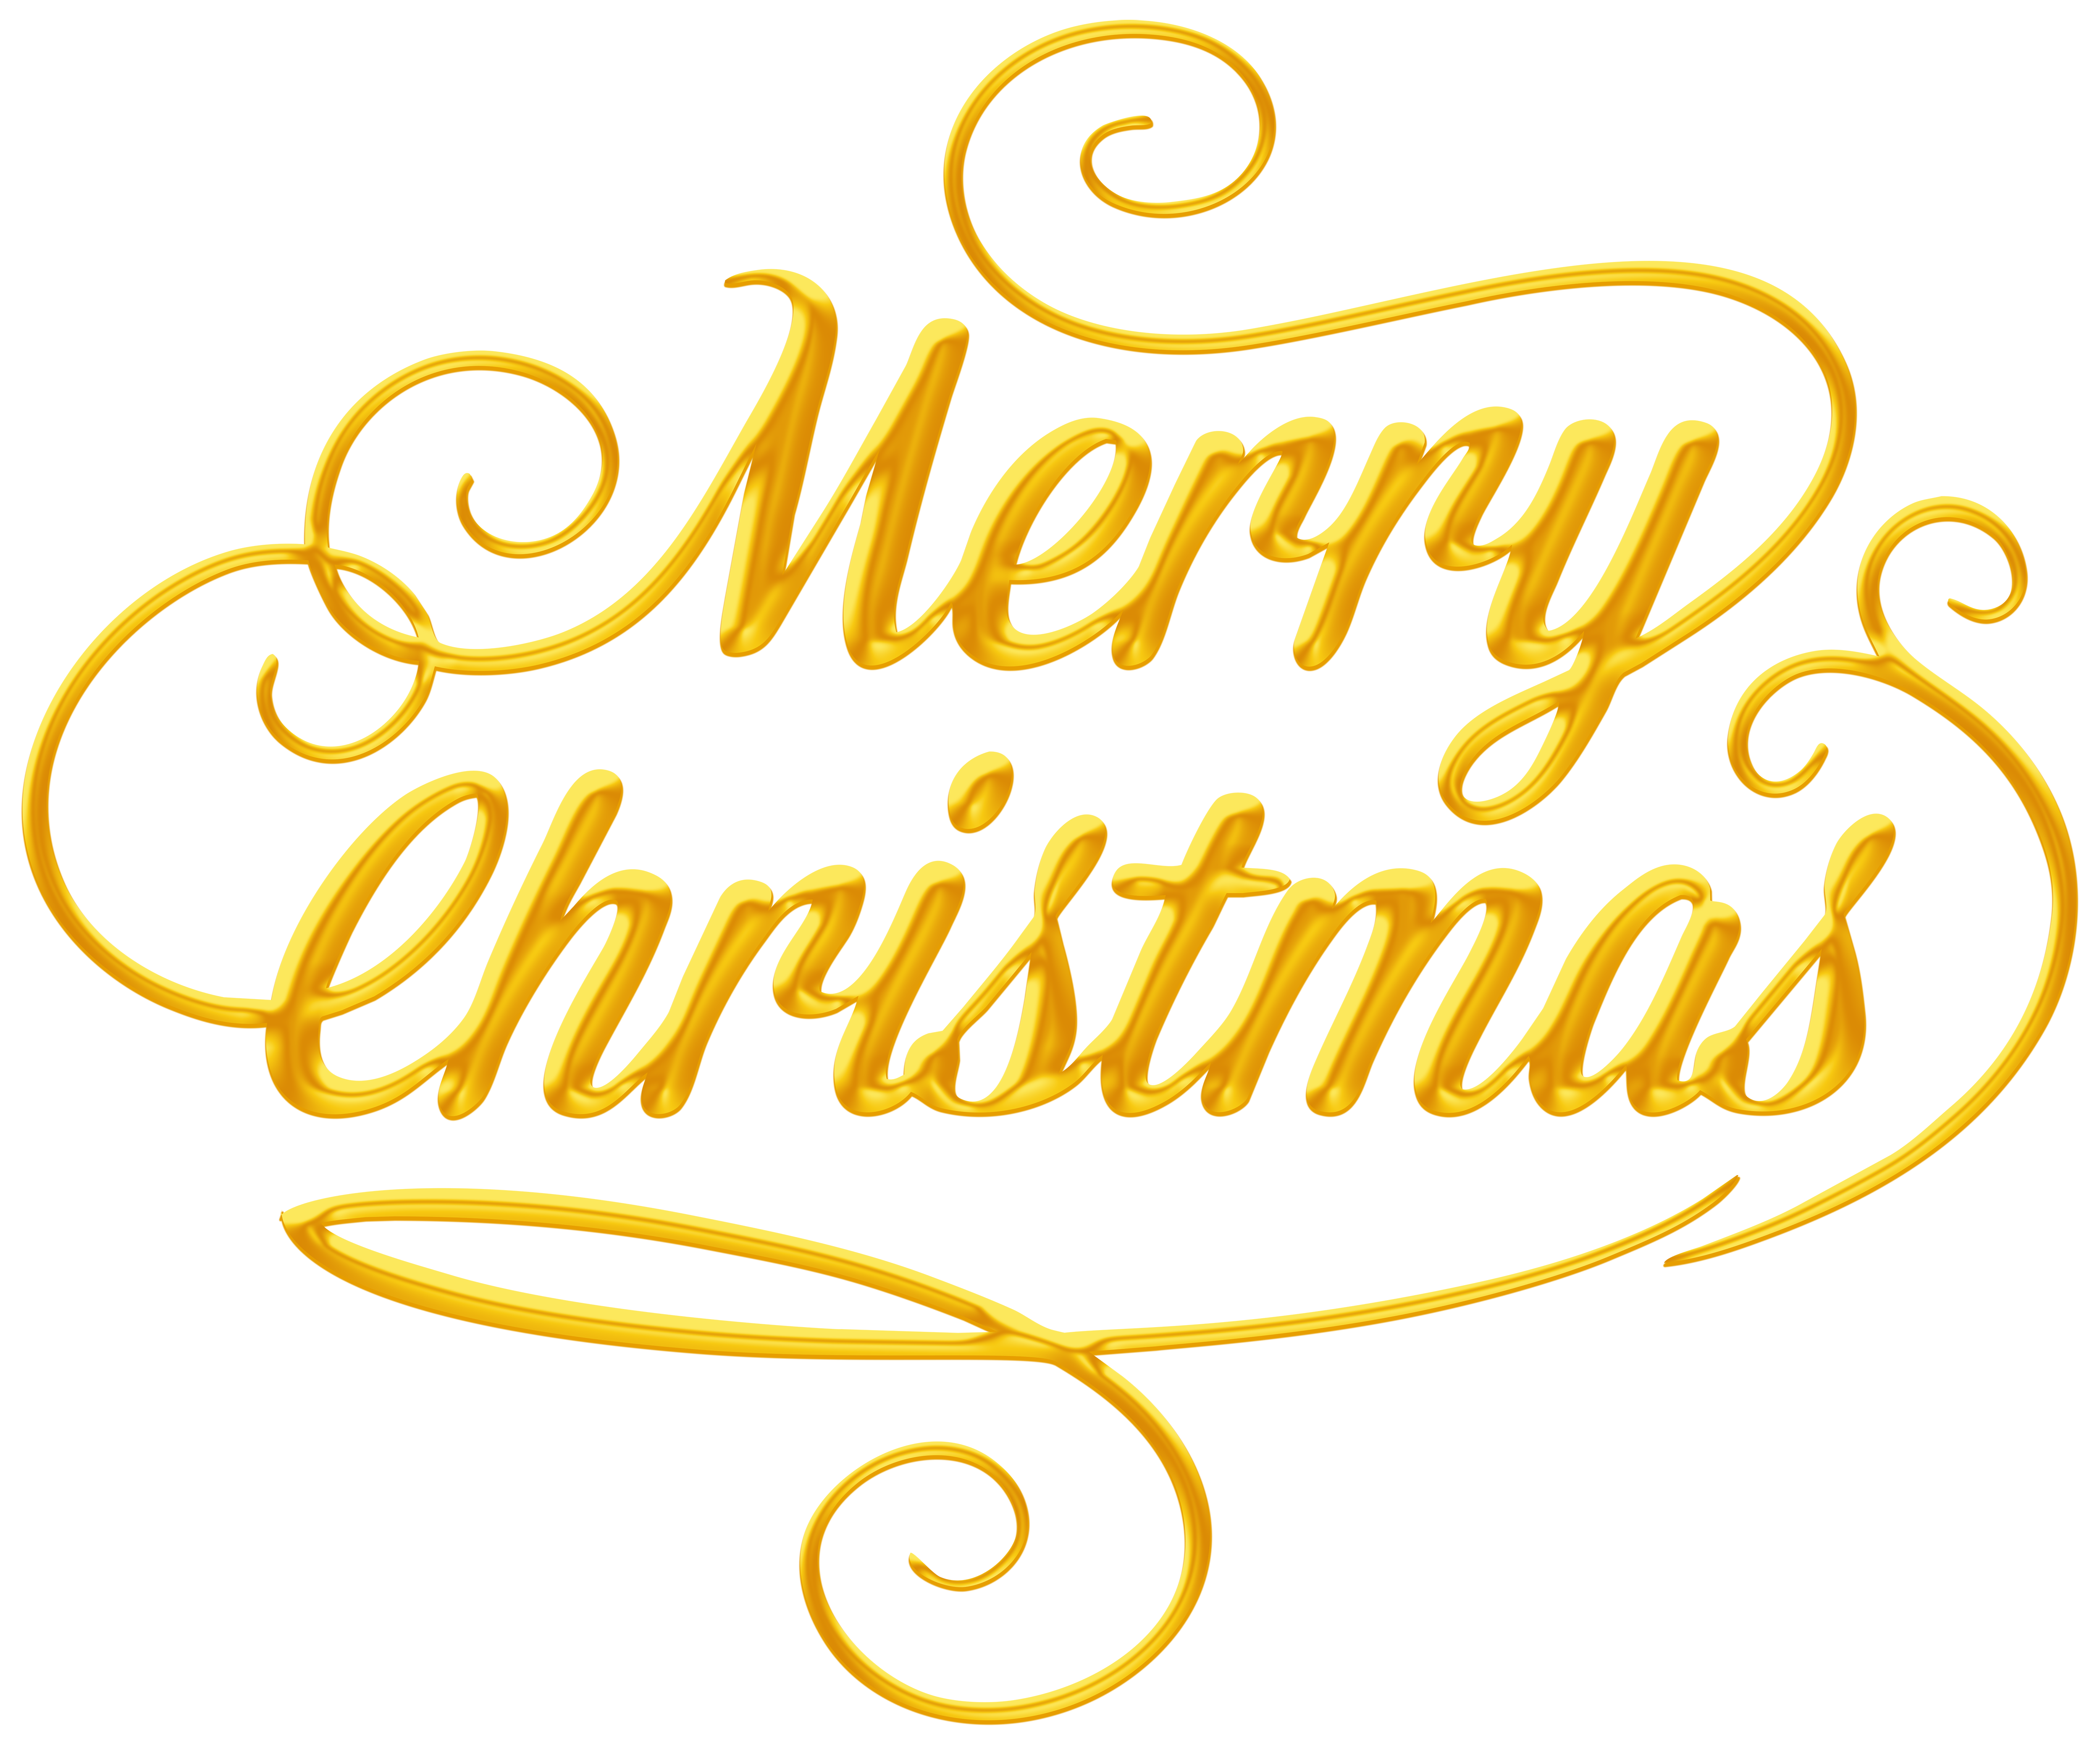 Gold Merry Christmas Text PNG HQ Image Transparent Background - Merry Christmas Png